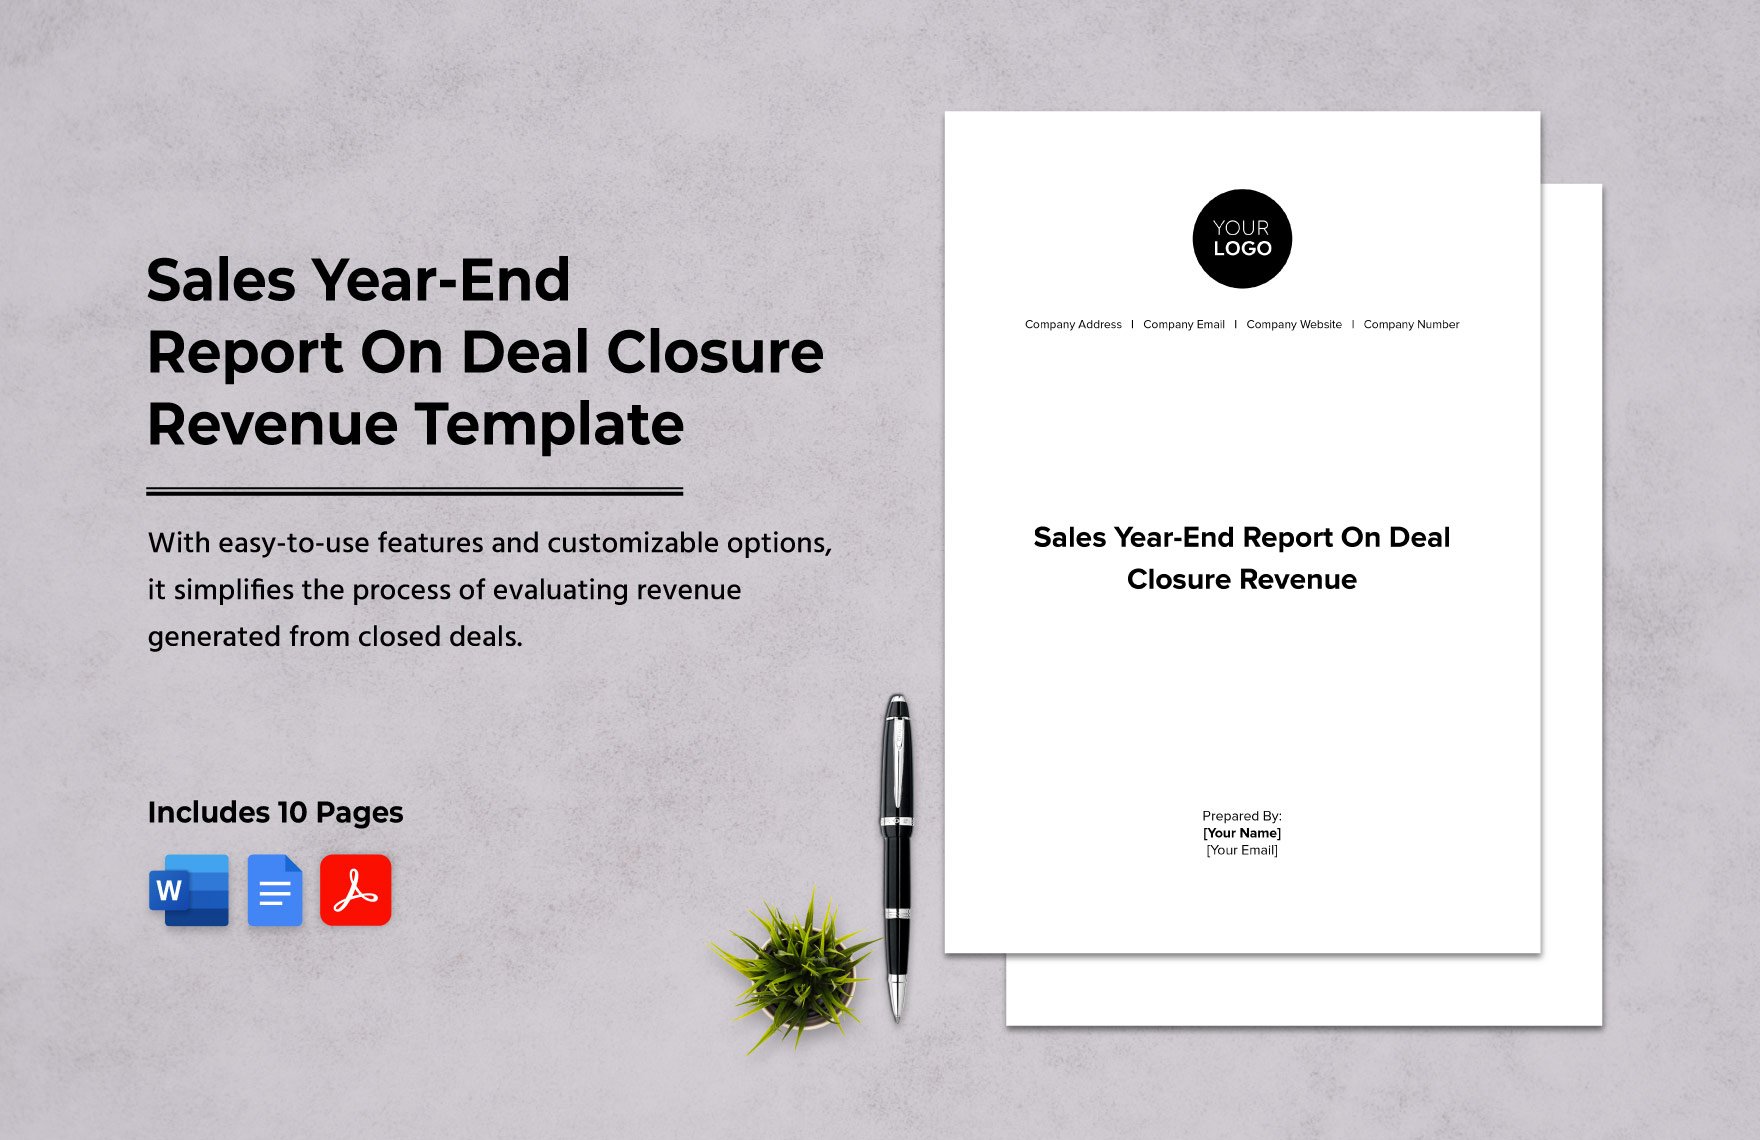 Sales Year-End Report On Deal Closure Revenue Template